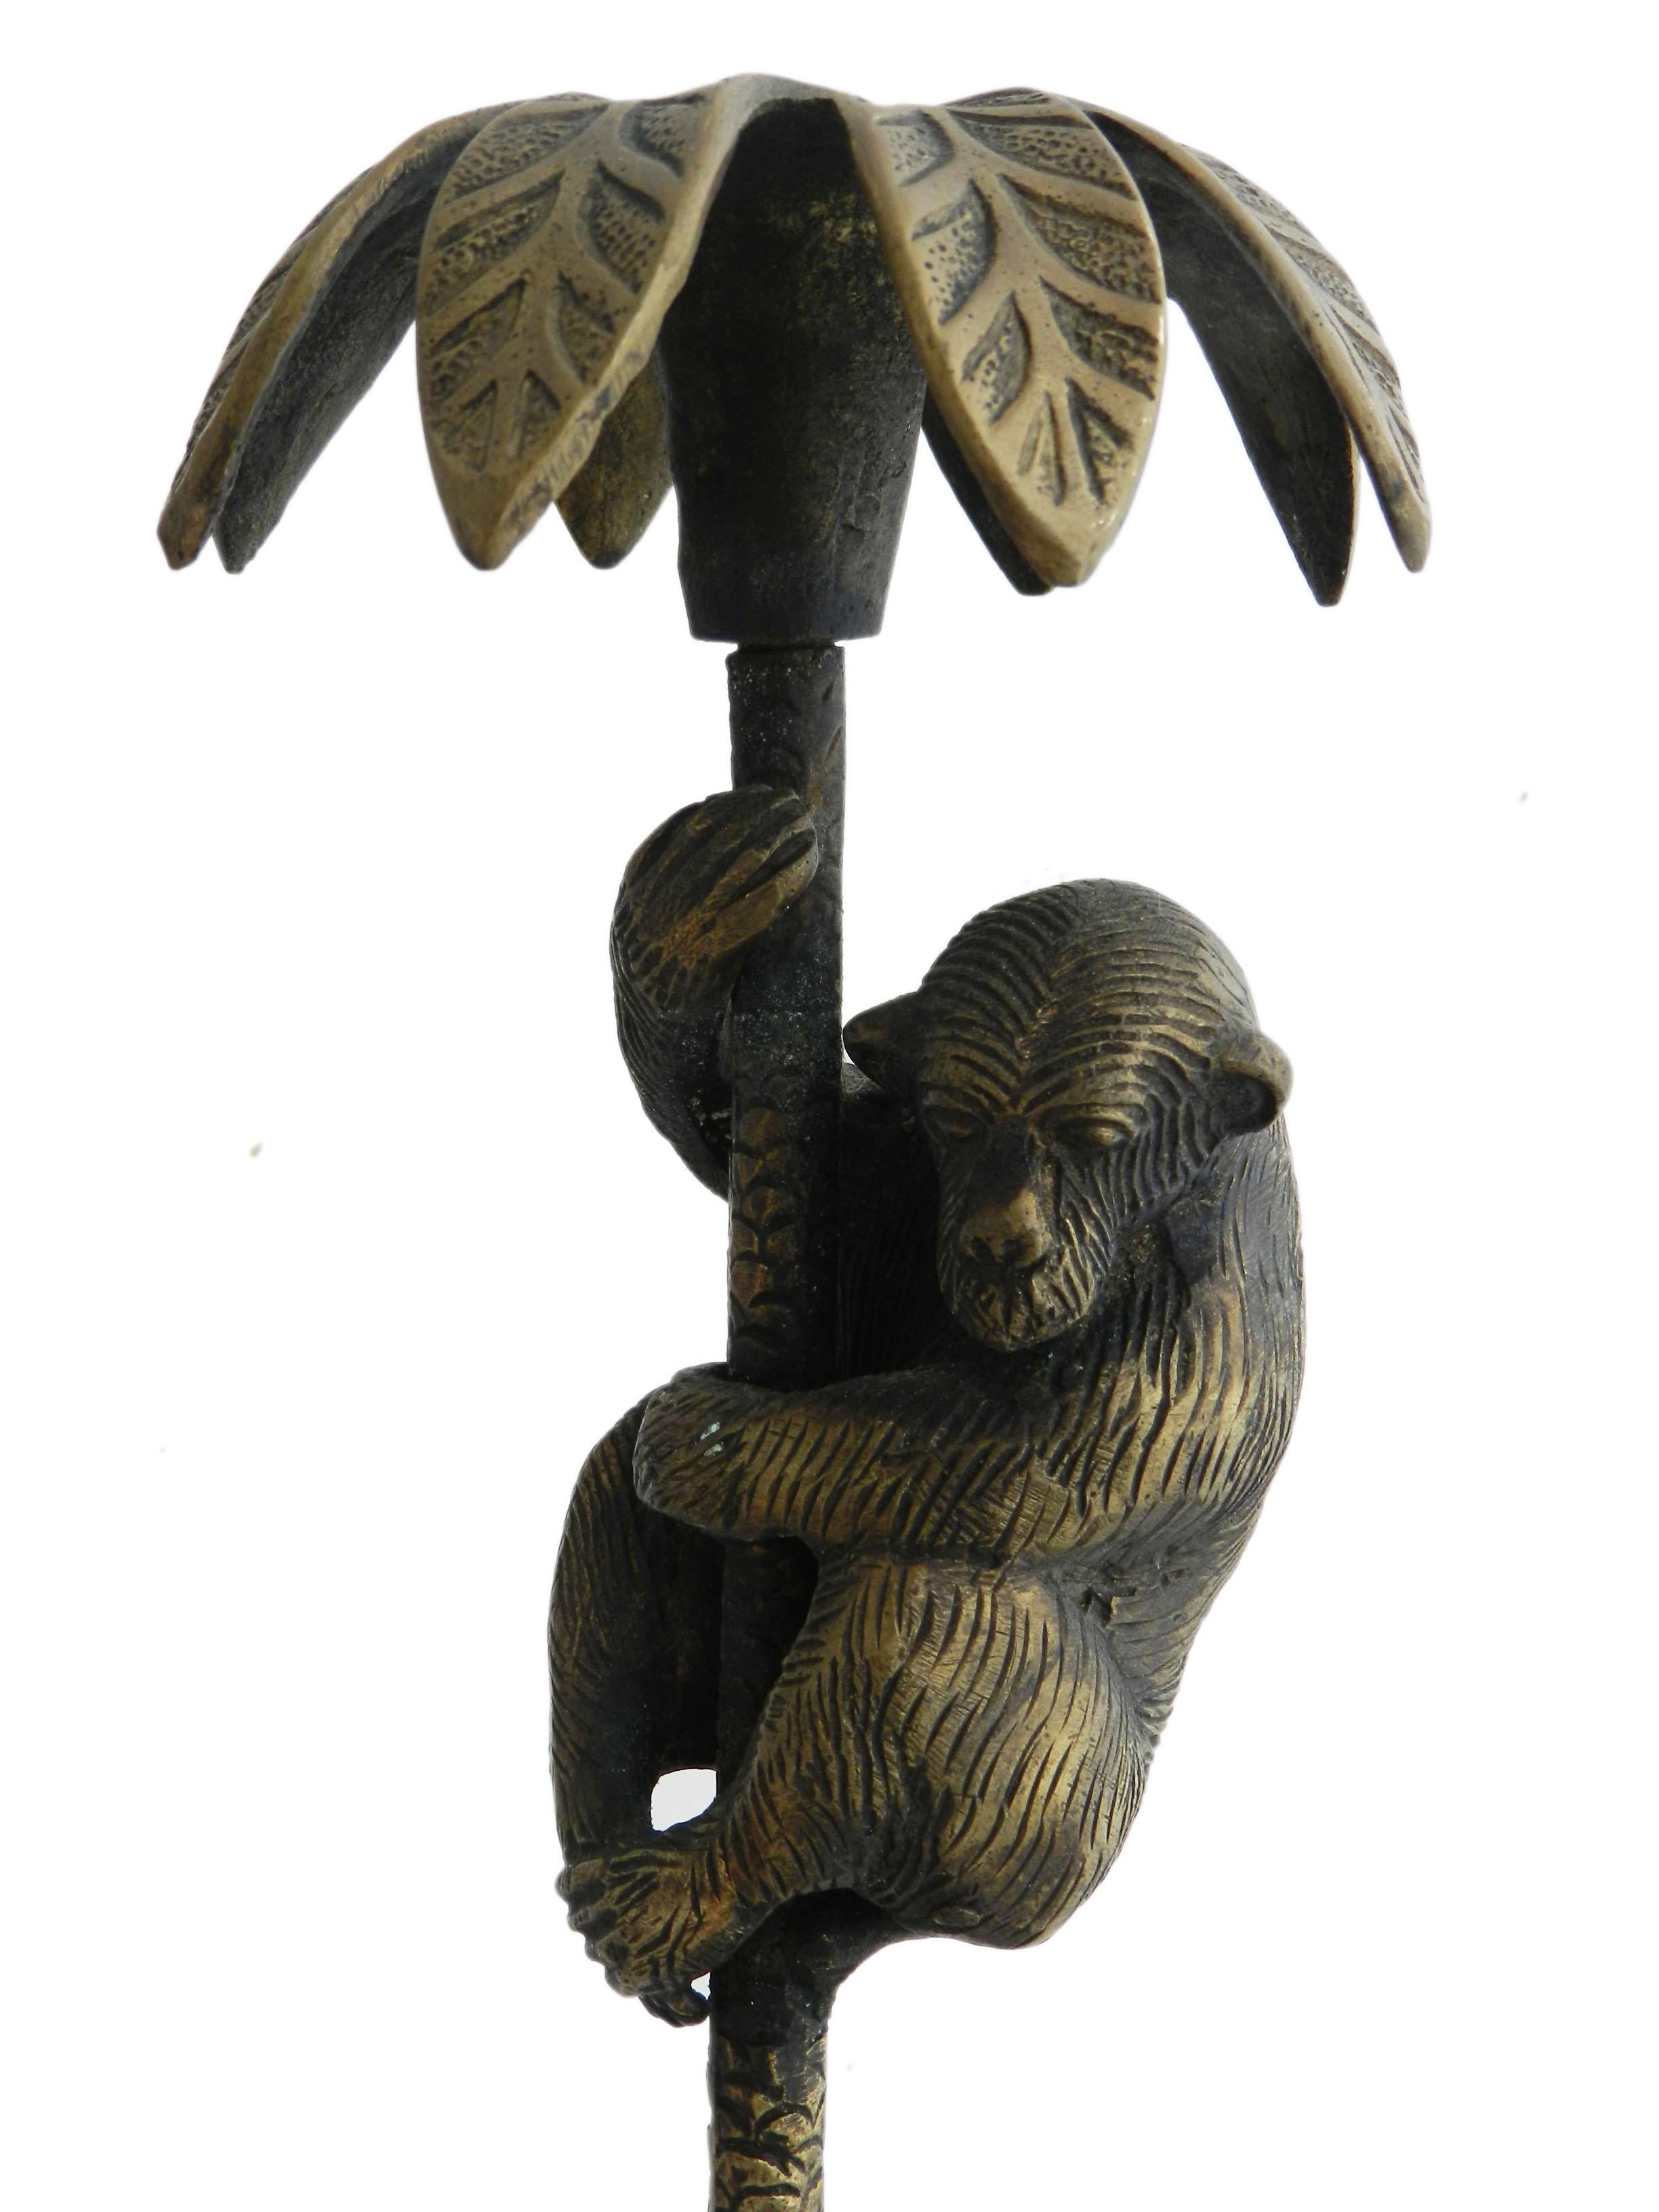 Pair Monkey candlesticks lamps midcentury
Made of Bronze and part Brass 
Good condition with good patination
Very heavy.

 